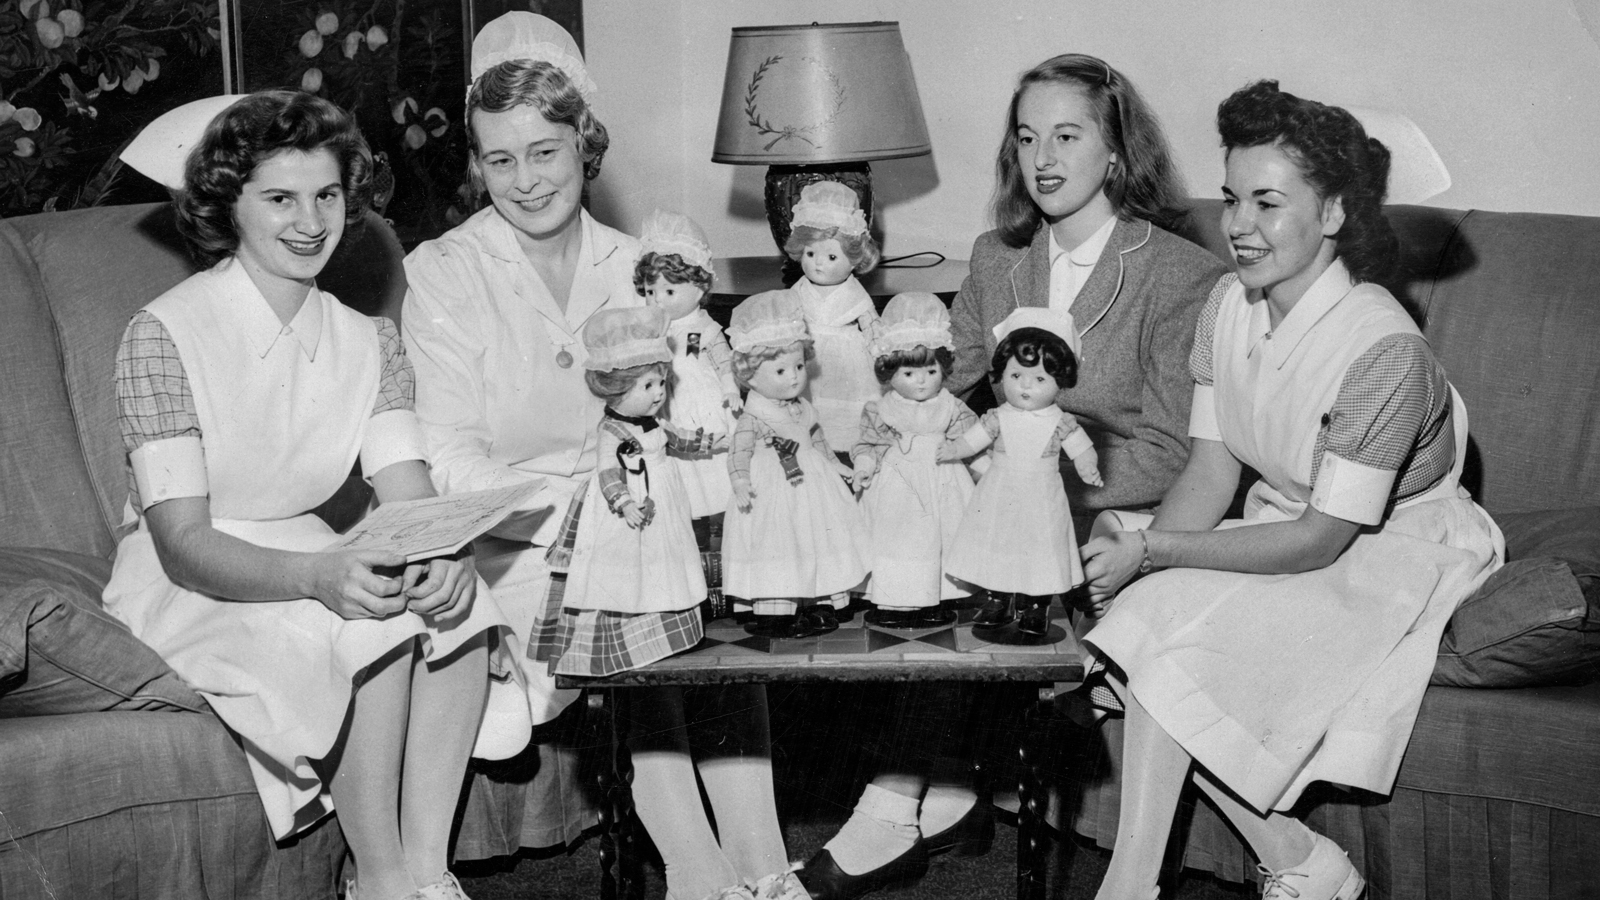 Nurses in a lounge with dolls that model student uniforms from different decades